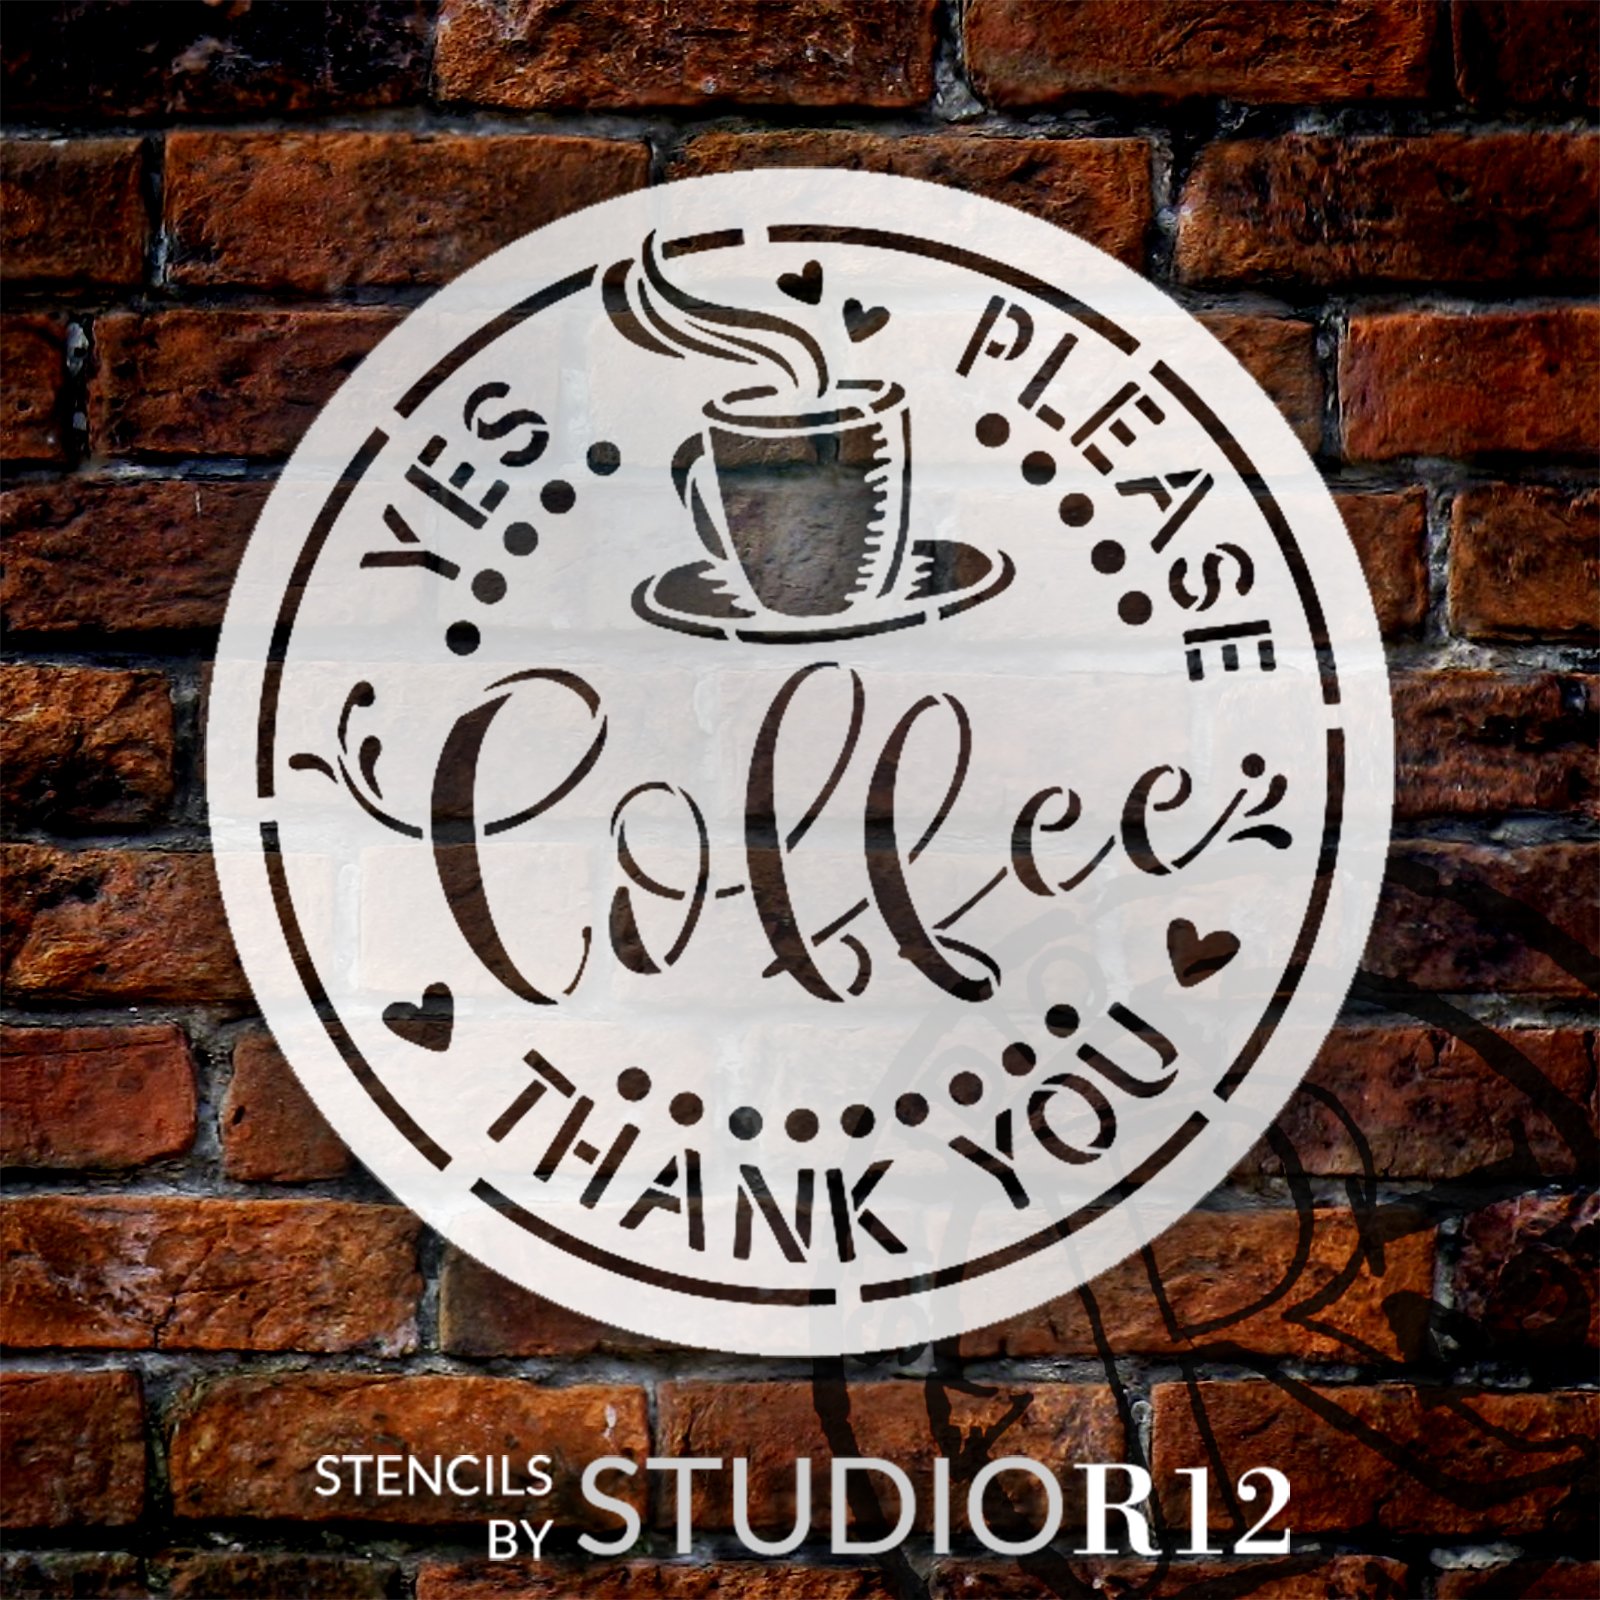 coffee-yes-please-thank-you-stencil-by-studior12-craft-cafe-diy